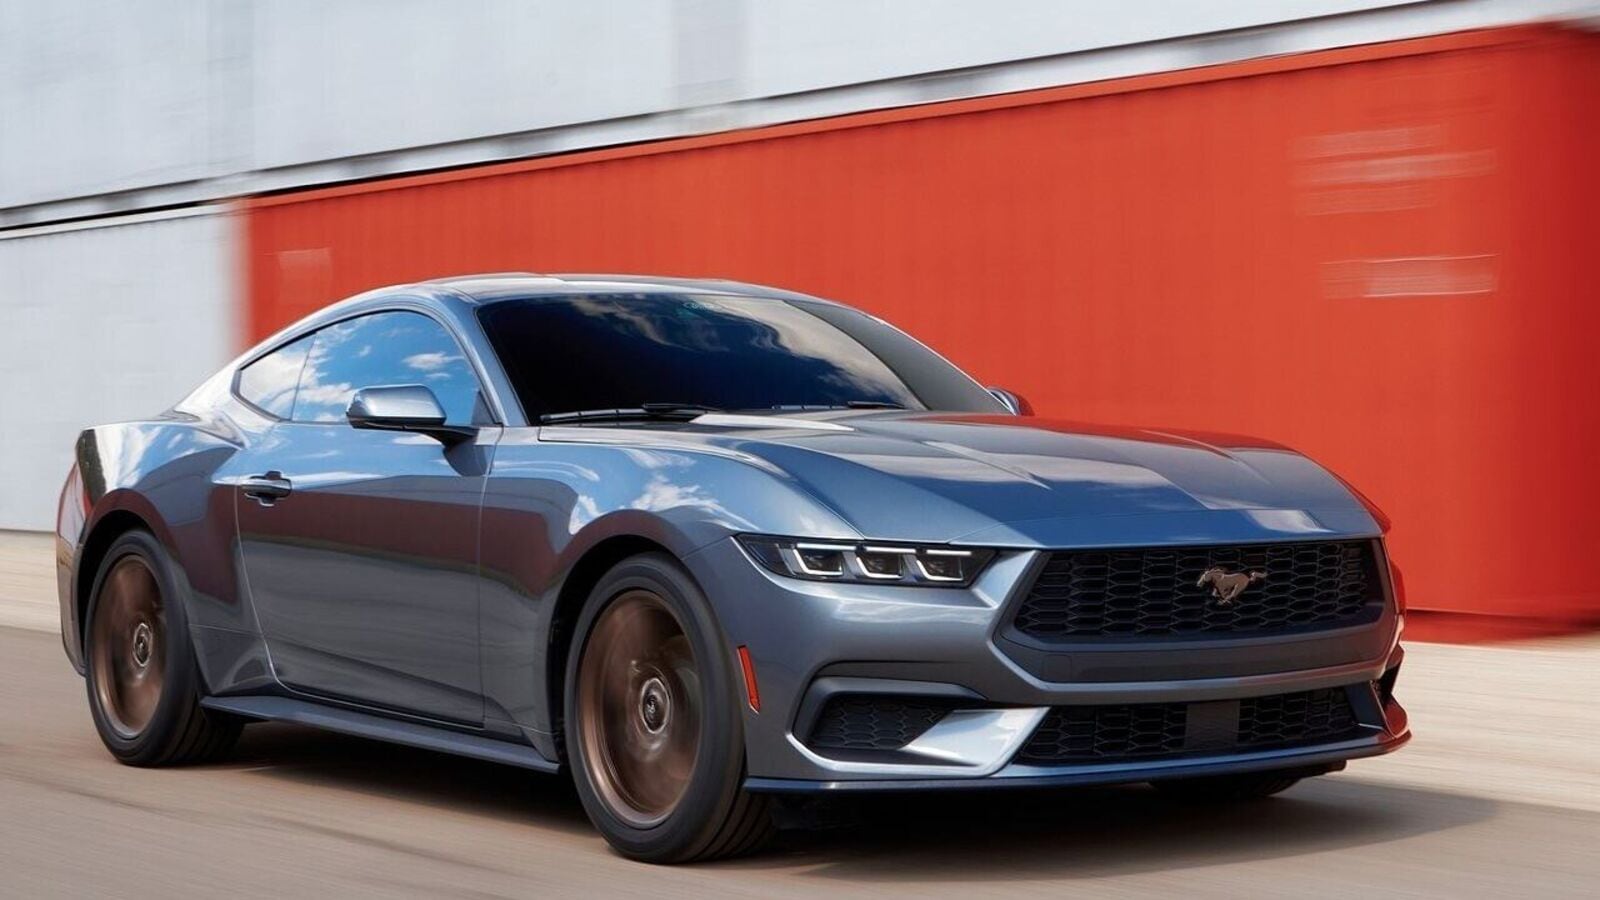 Ford Introduced the Seventh Generation of Mustang at Detroit Auto Show, Check Details